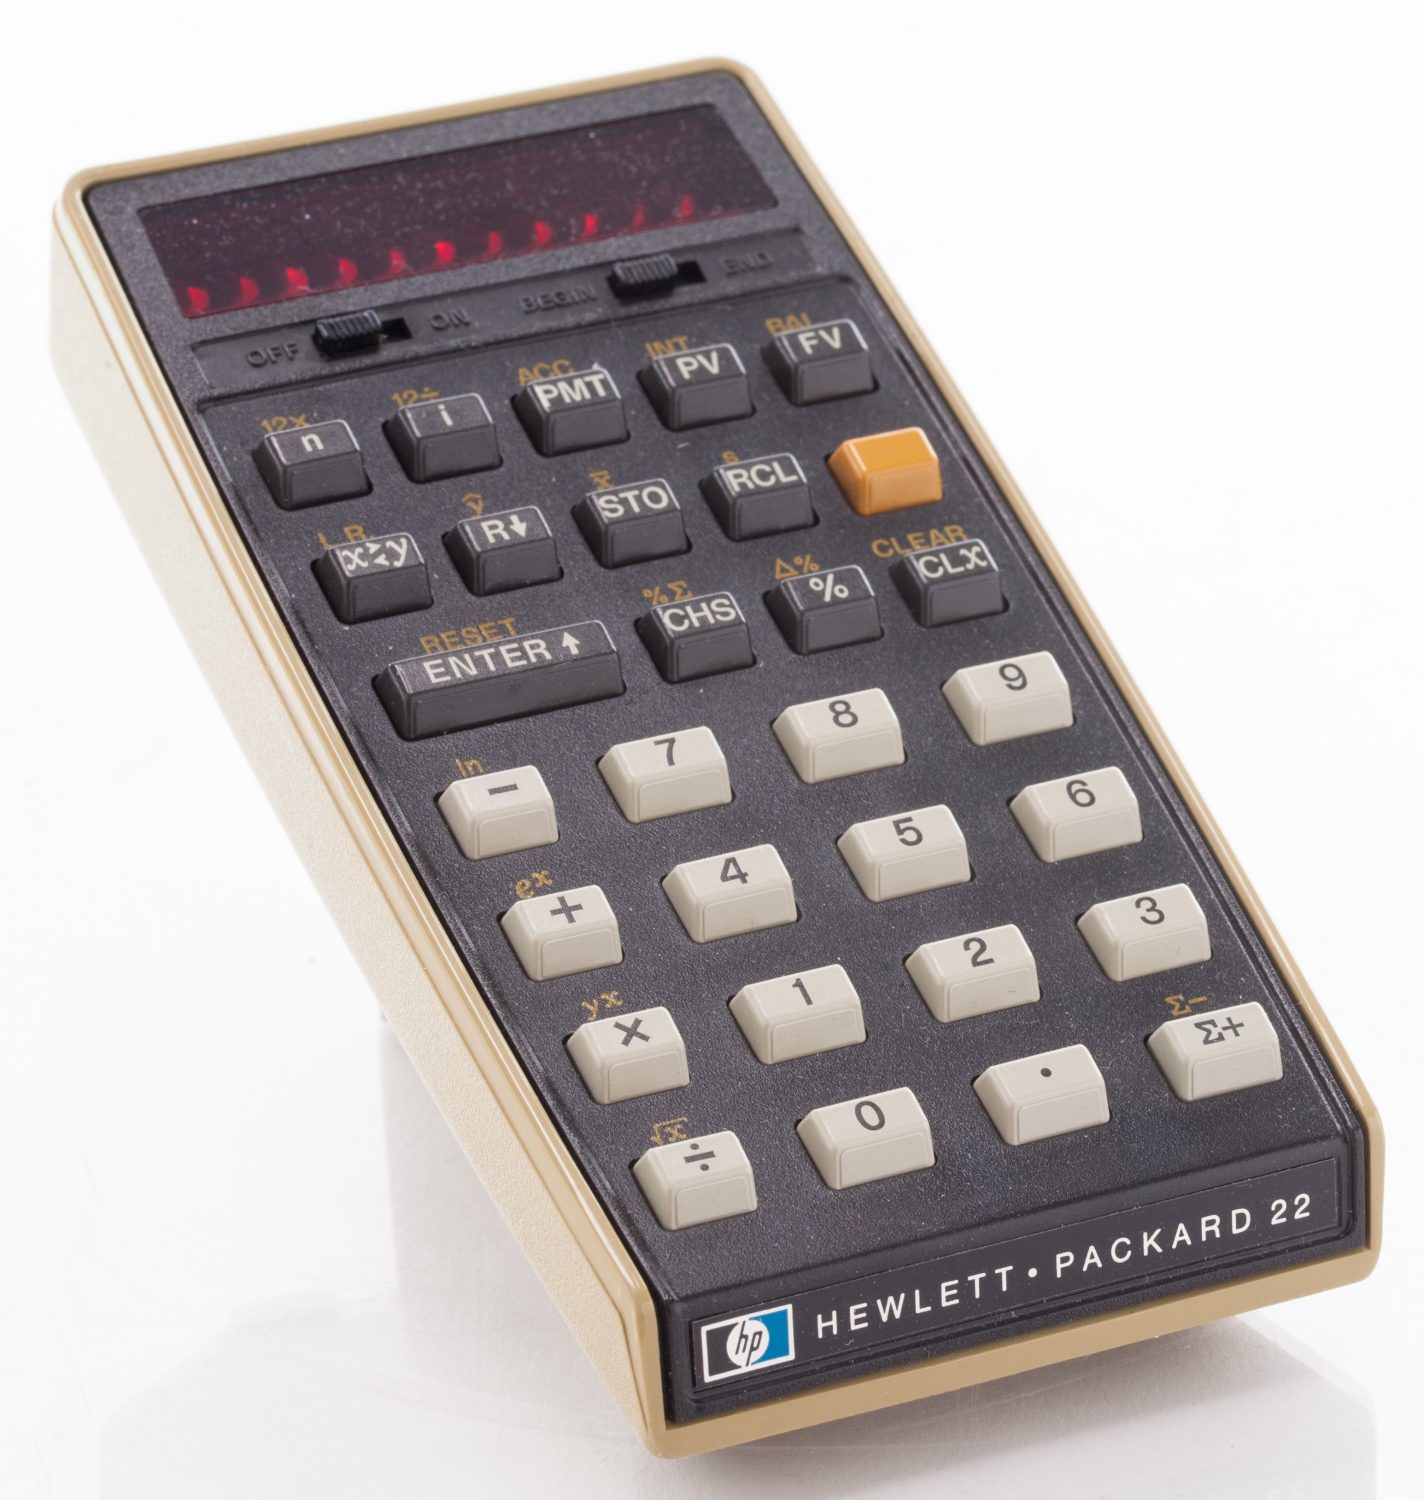 A photo of the HP 22 calculator featuring the small logo on the bottom left of the device.